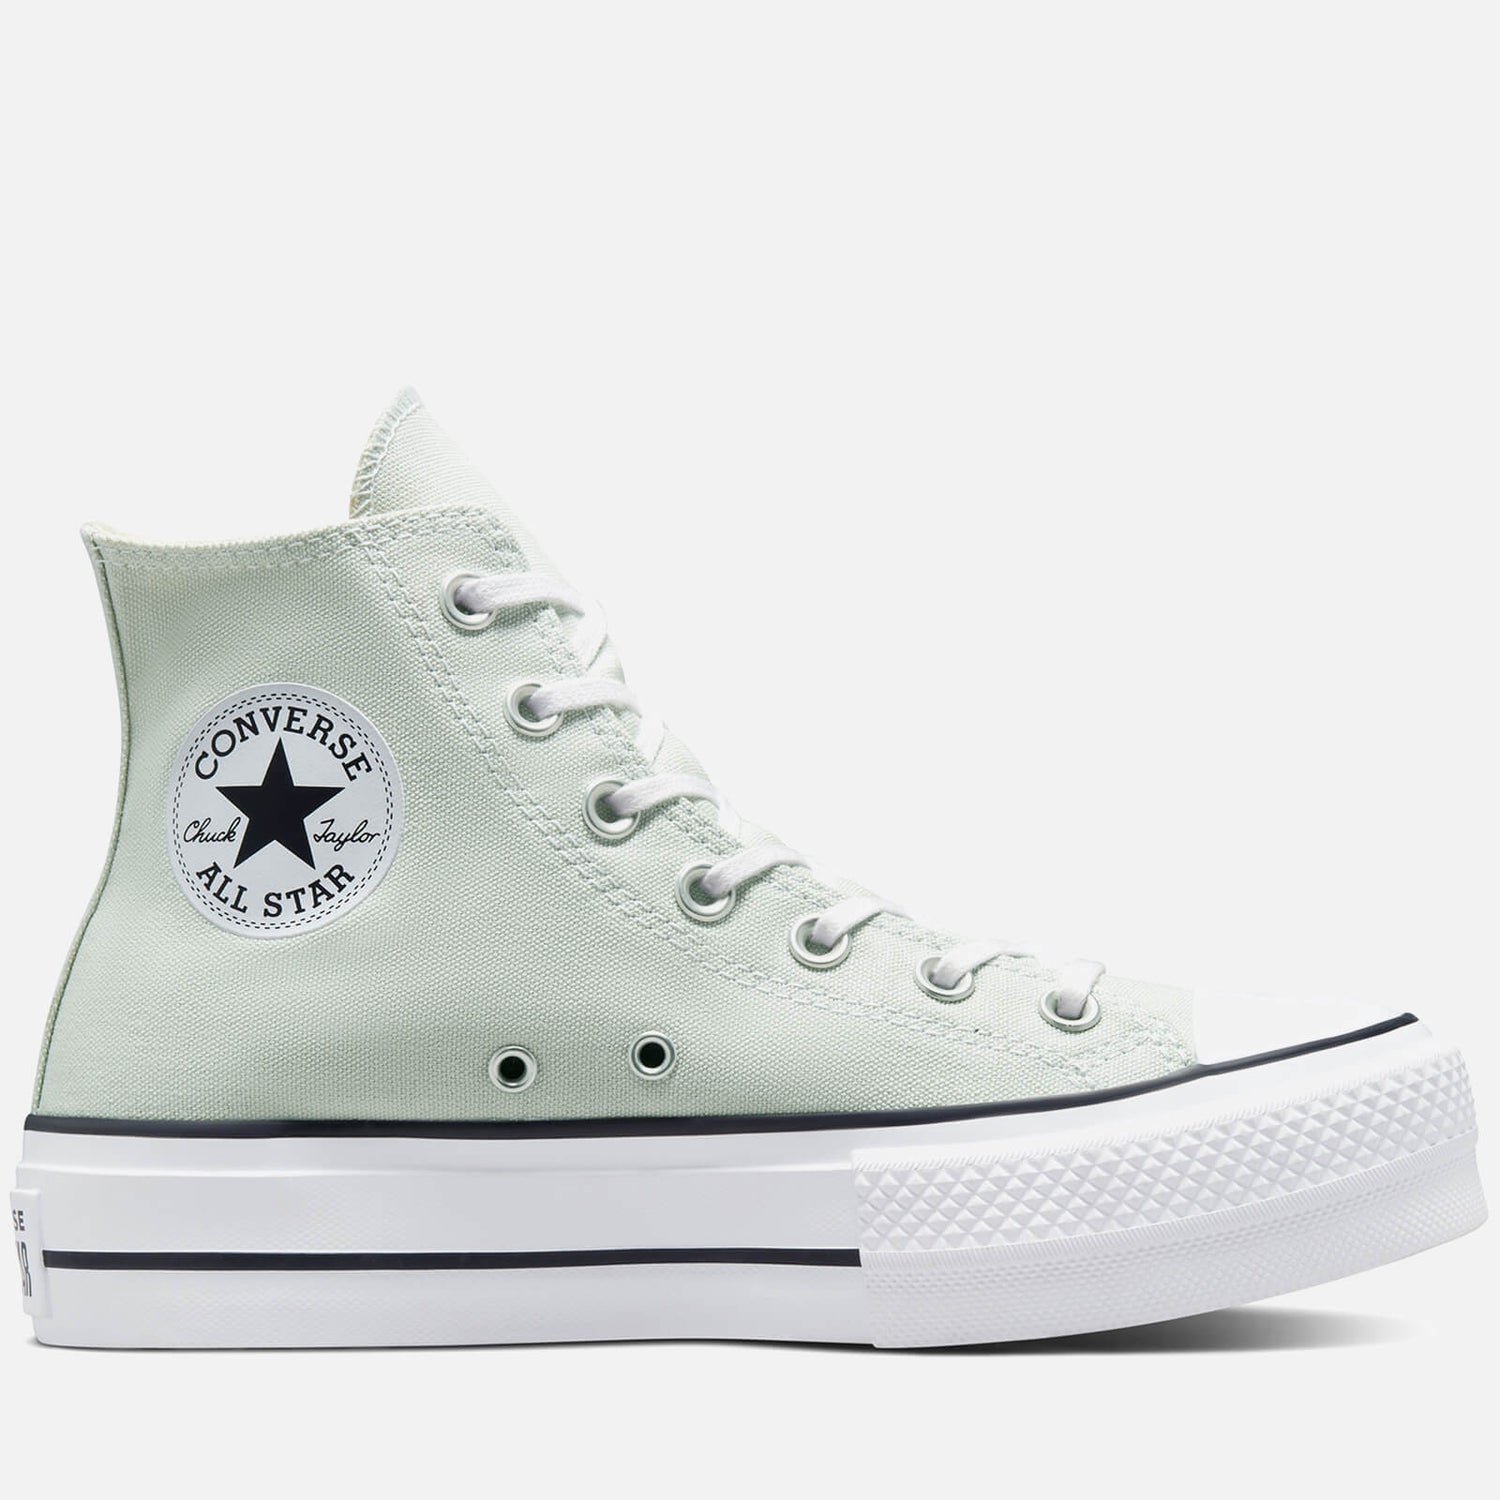 Converse Women's Chuck Taylor All Star Lift Hi-Top Trainers - Light Silver/Black/White - UK 3